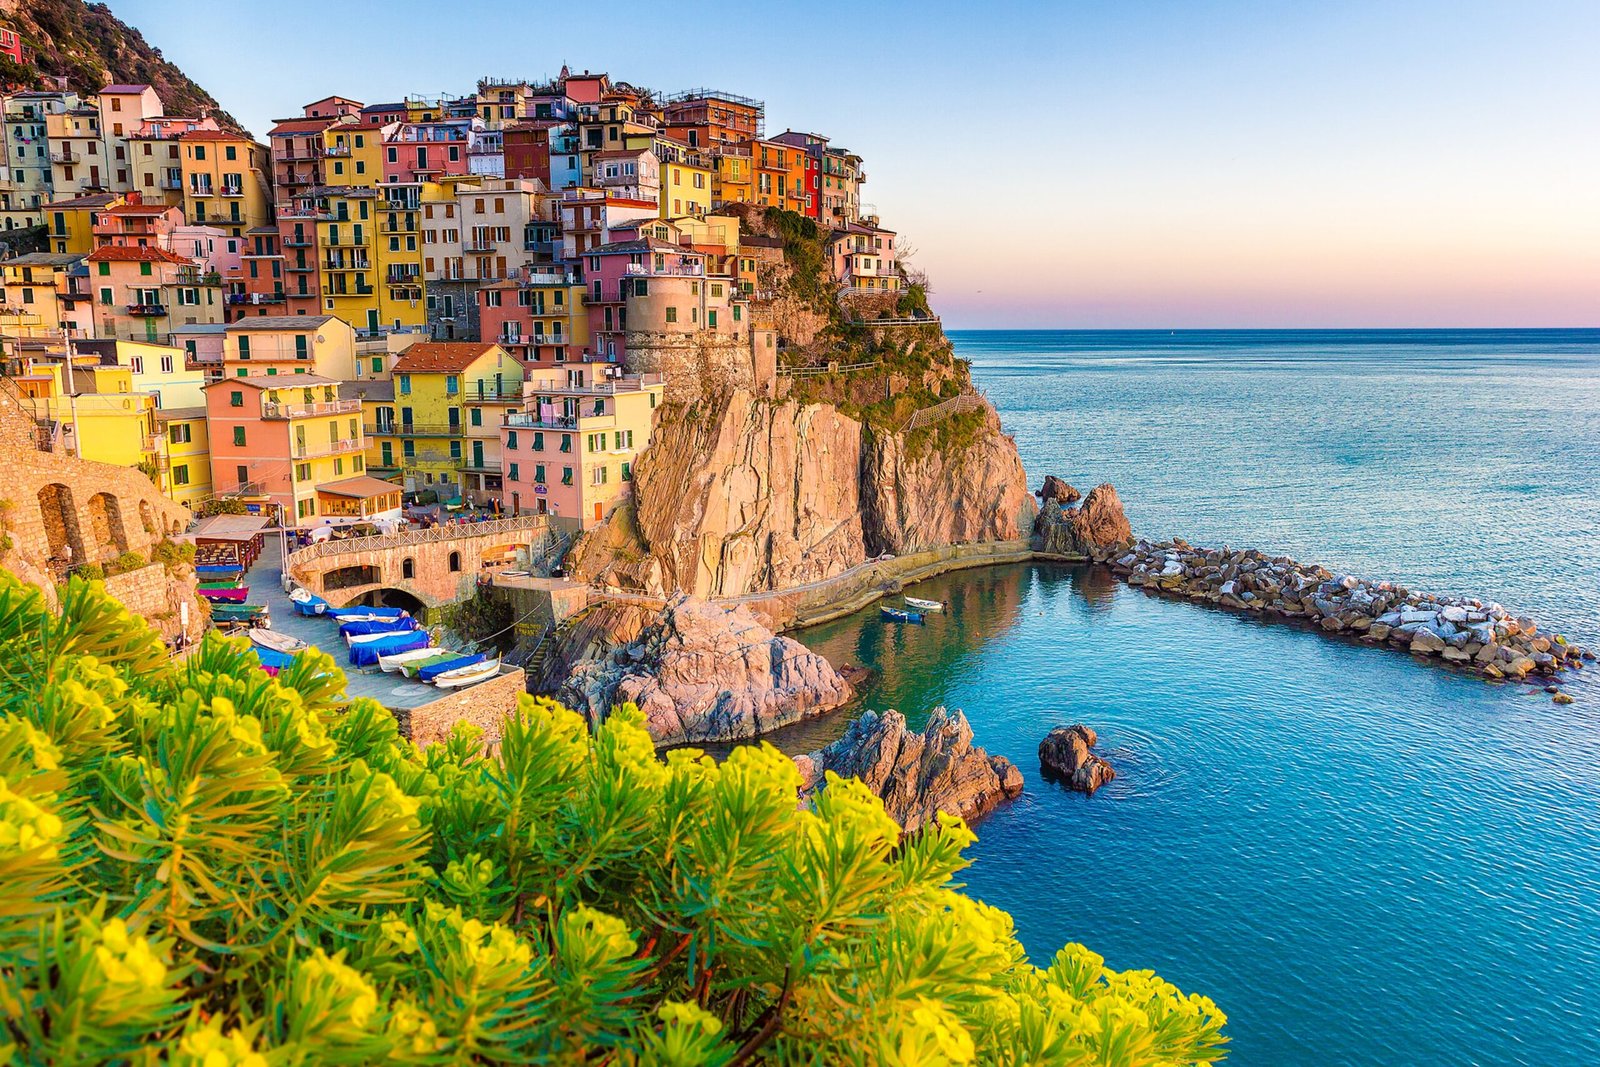 a stunning stretch of coastline located in the Campania region of southern Italy. It's one of the most popular destinations in Italy, known for its breathtaking views